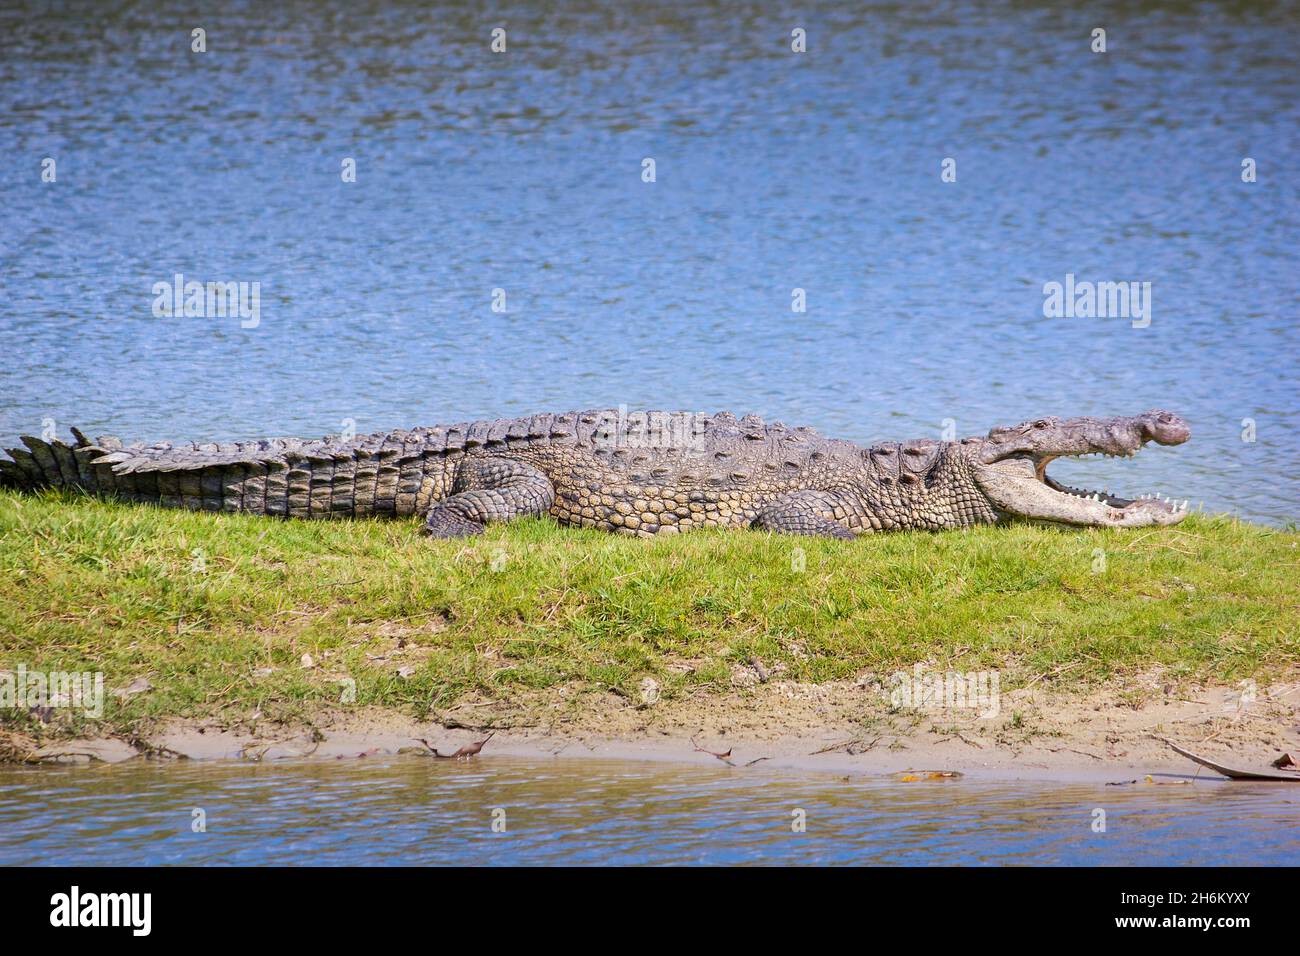 An American Crocodile basks in the sun in Everglades National Park. During the cooler months alligators and crocodiles stay in the sun to keep warm. Stock Photo